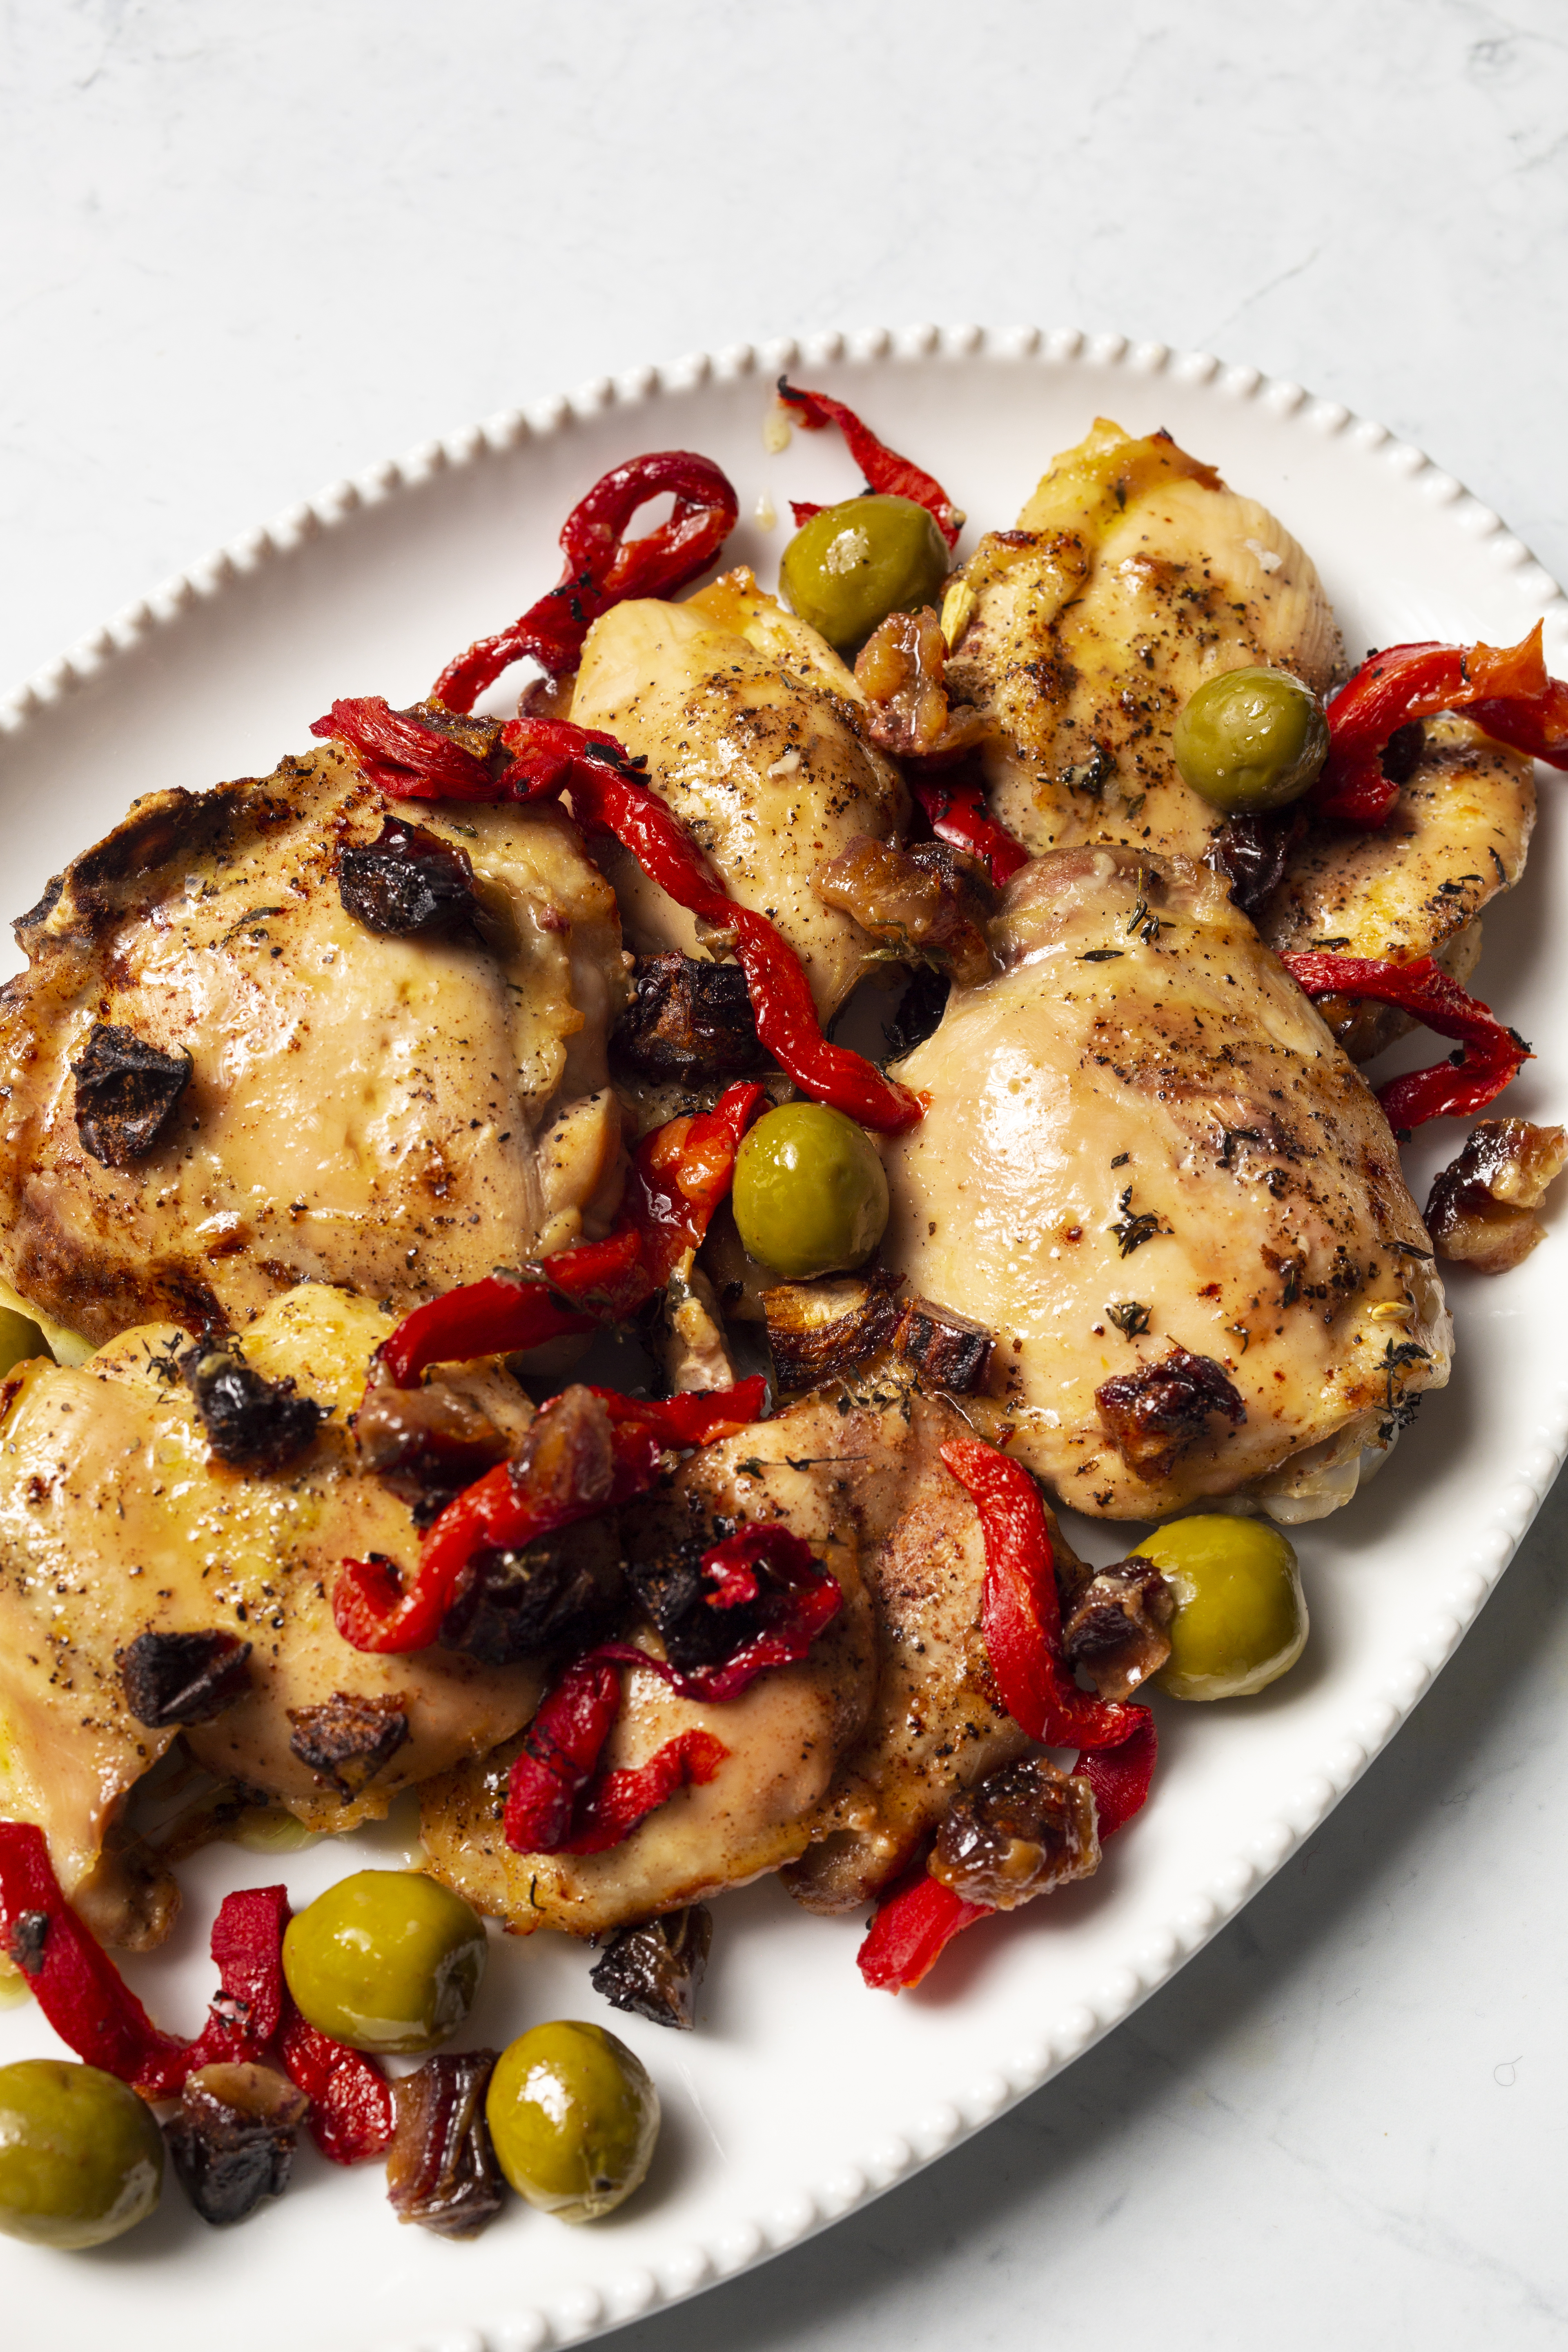 Oven-Roasted Orange Chicken with Dates